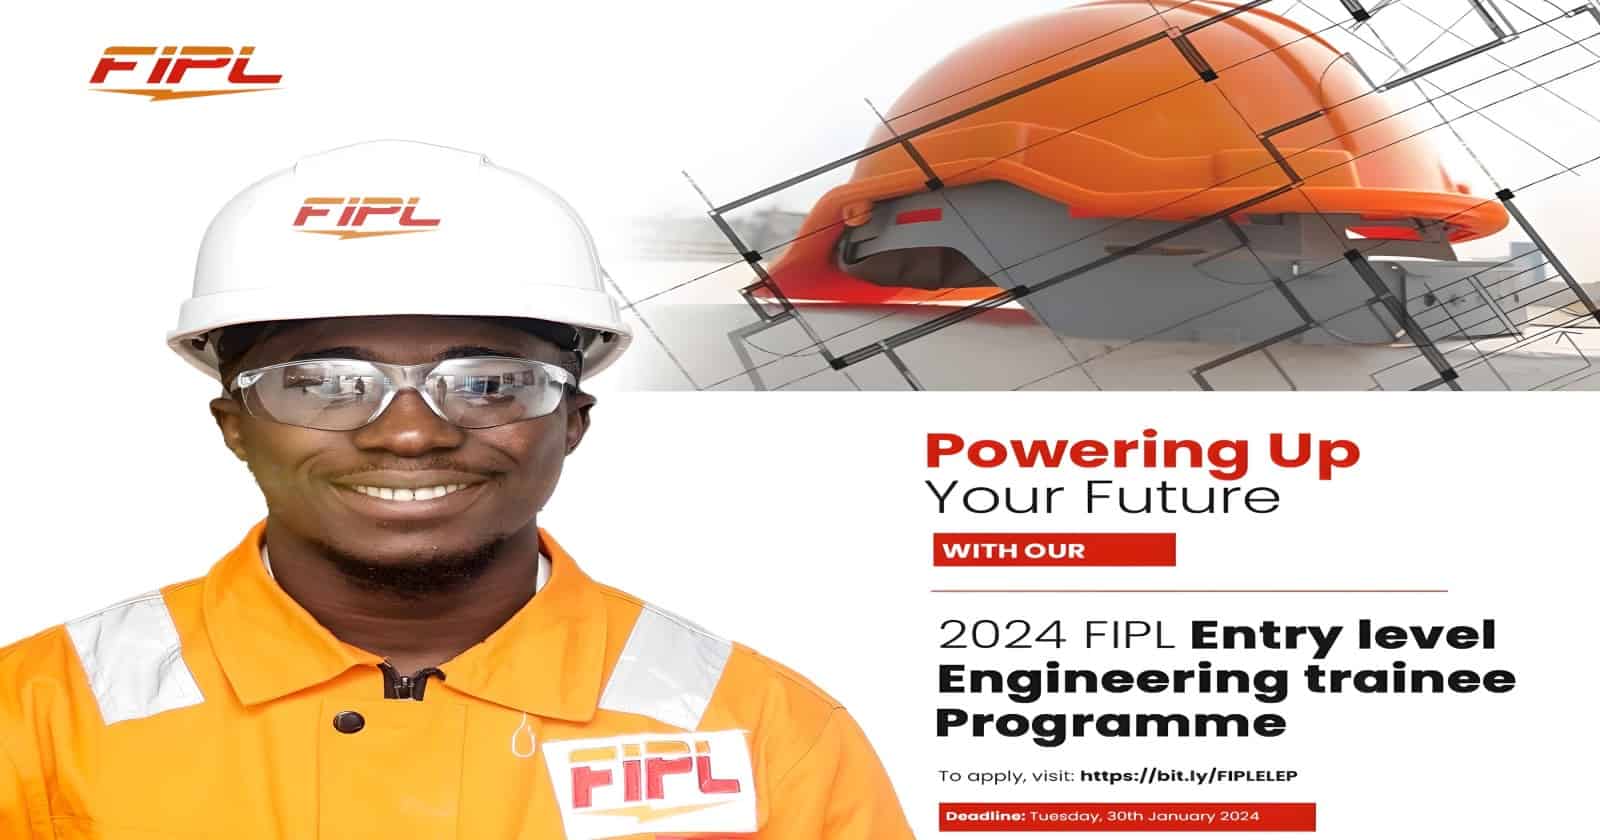 FIPL Entry-Level Engineering Trainee Programme